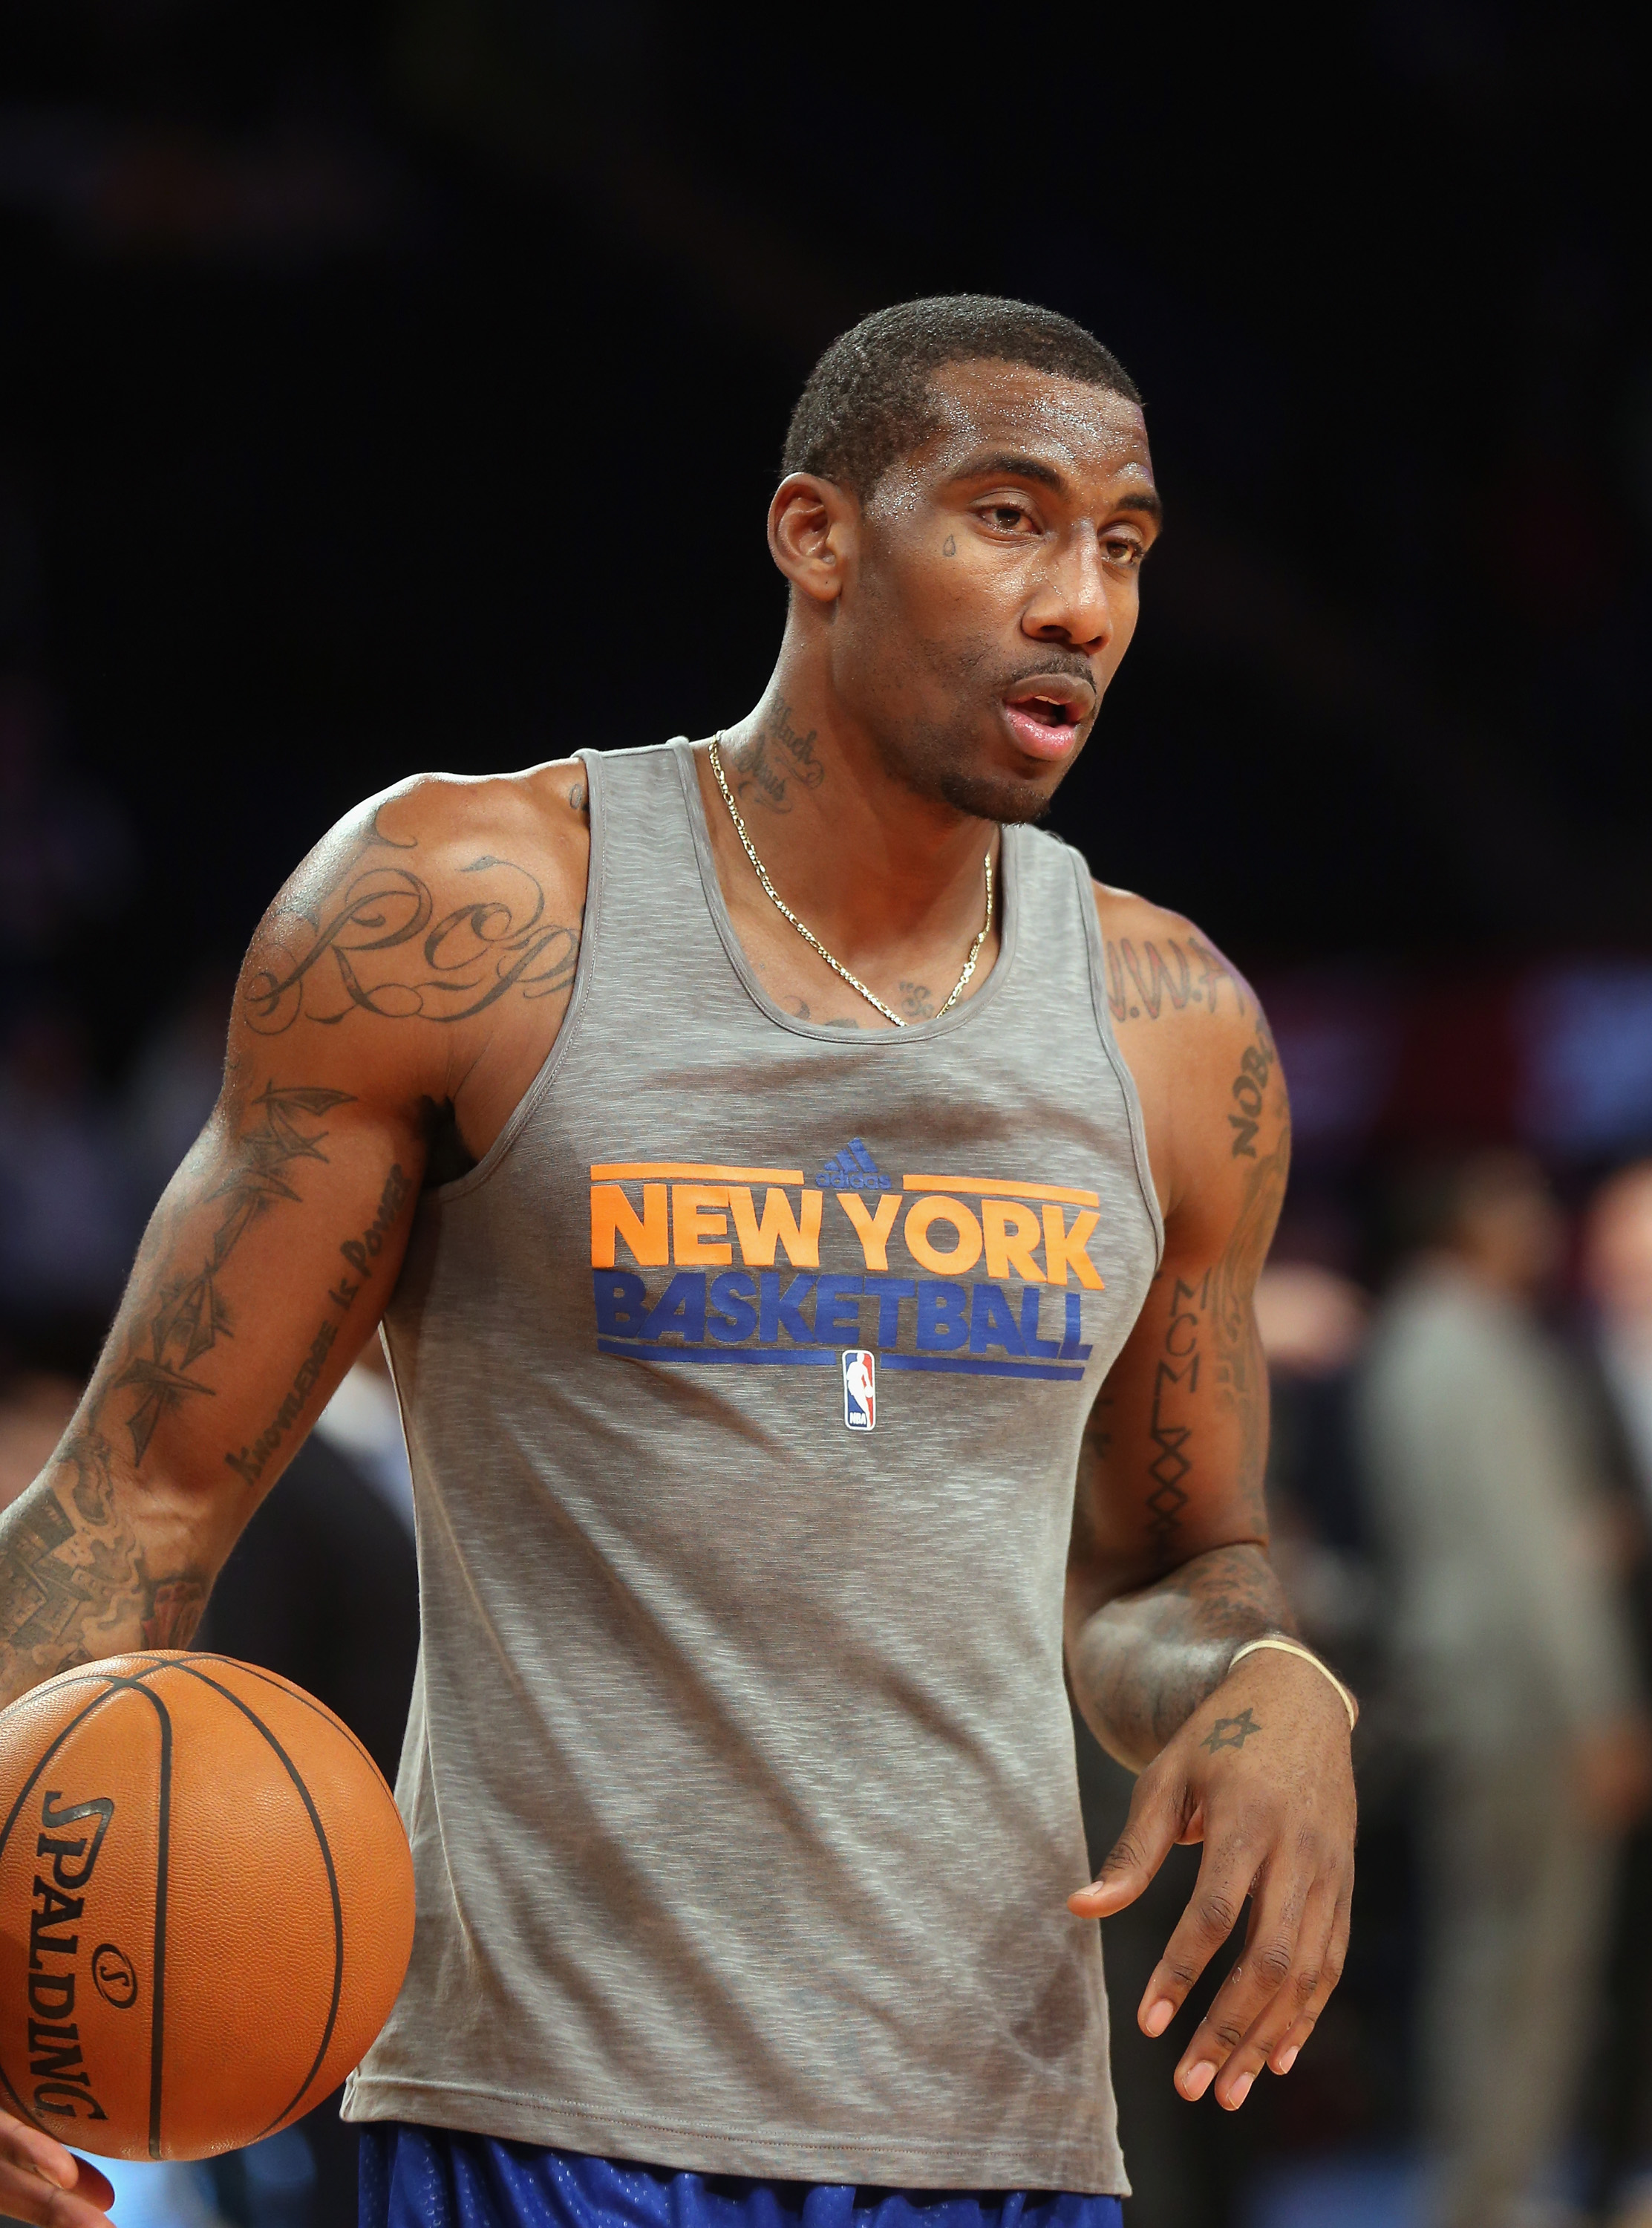 NEW YORK, NY - DECEMBER 13:  Amar'e Stoudemire
#1 of the New York Knicks warms up prior to the game against the Los Angeles Lakers at Madison Square Garden on December 13, 2012 in New York City. NOTE TO USER: User expressly acknowledges and agrees that, b